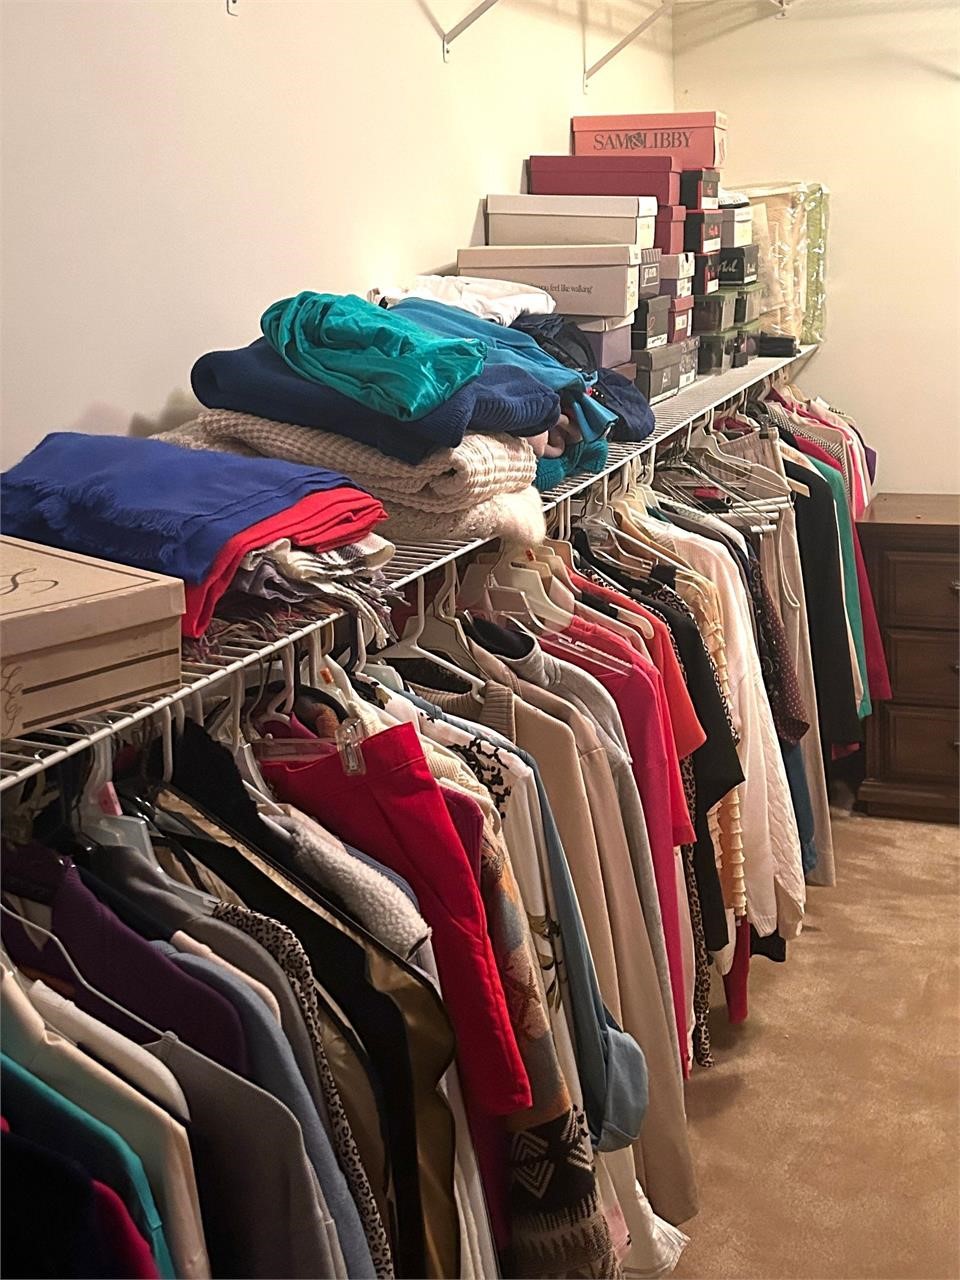 Closet Full of Clothes,shoes,sweater,bags,etc